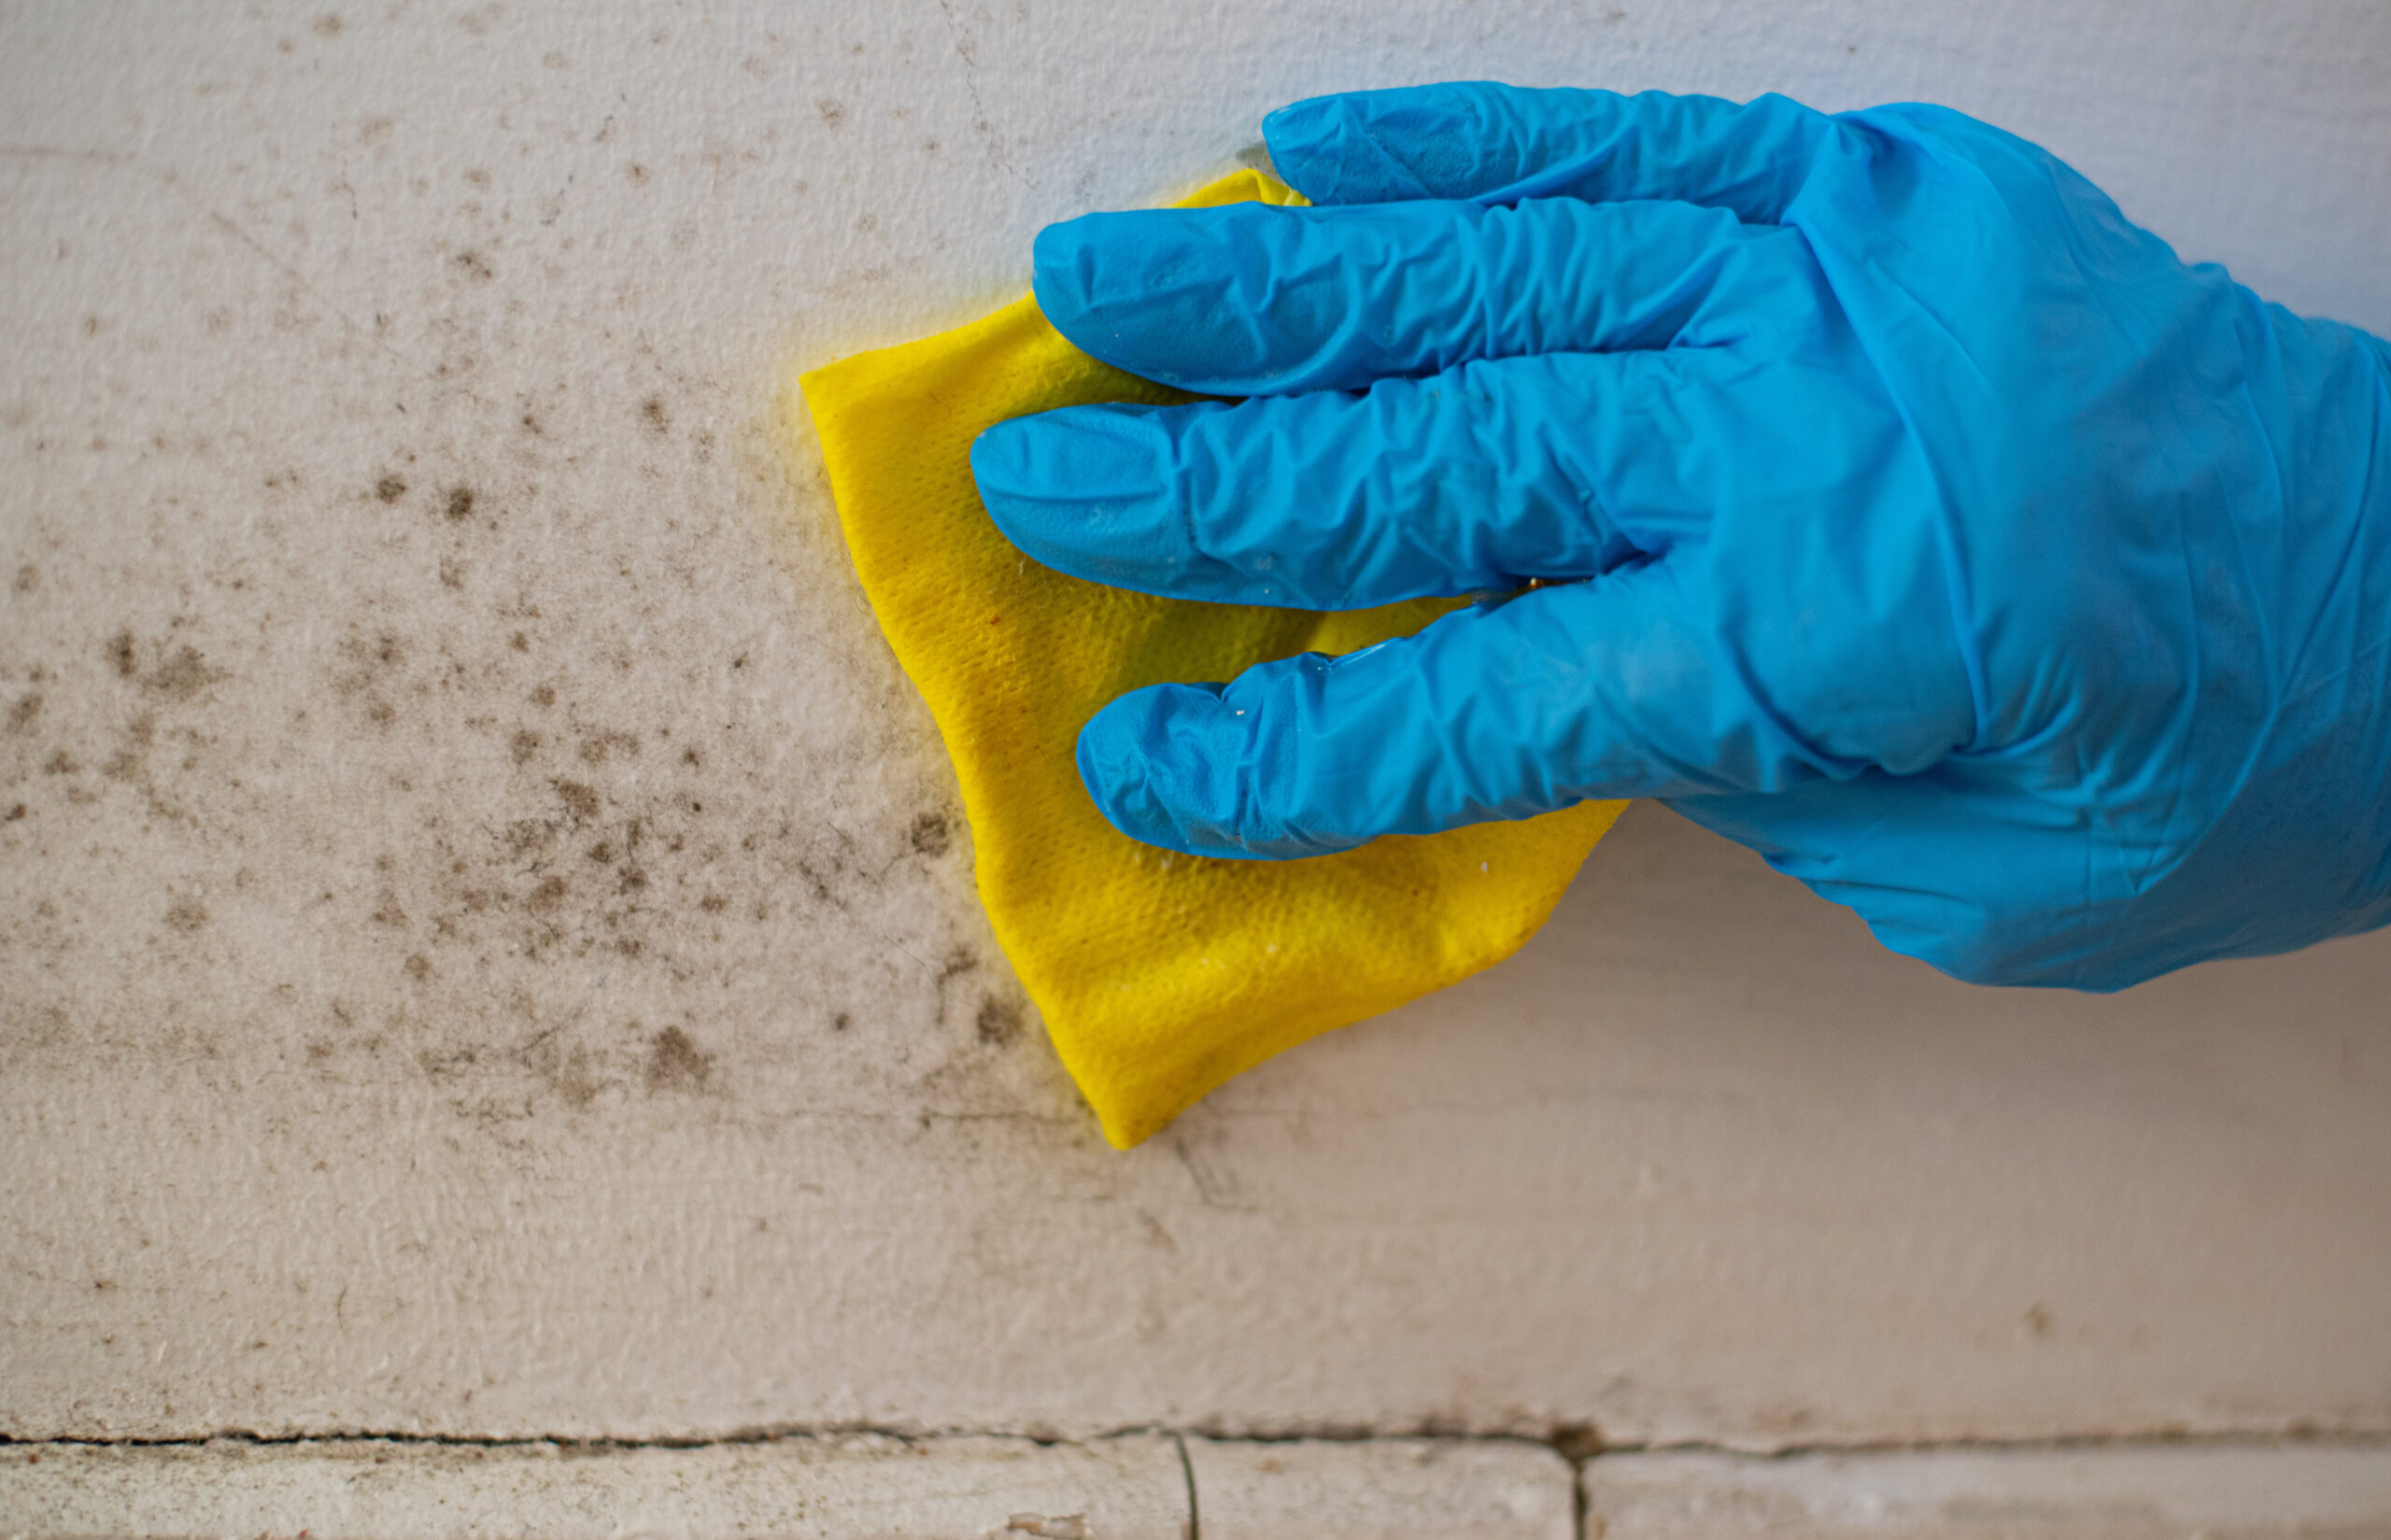 A Professional Hand holding a sponge, used in Mold Remediation.